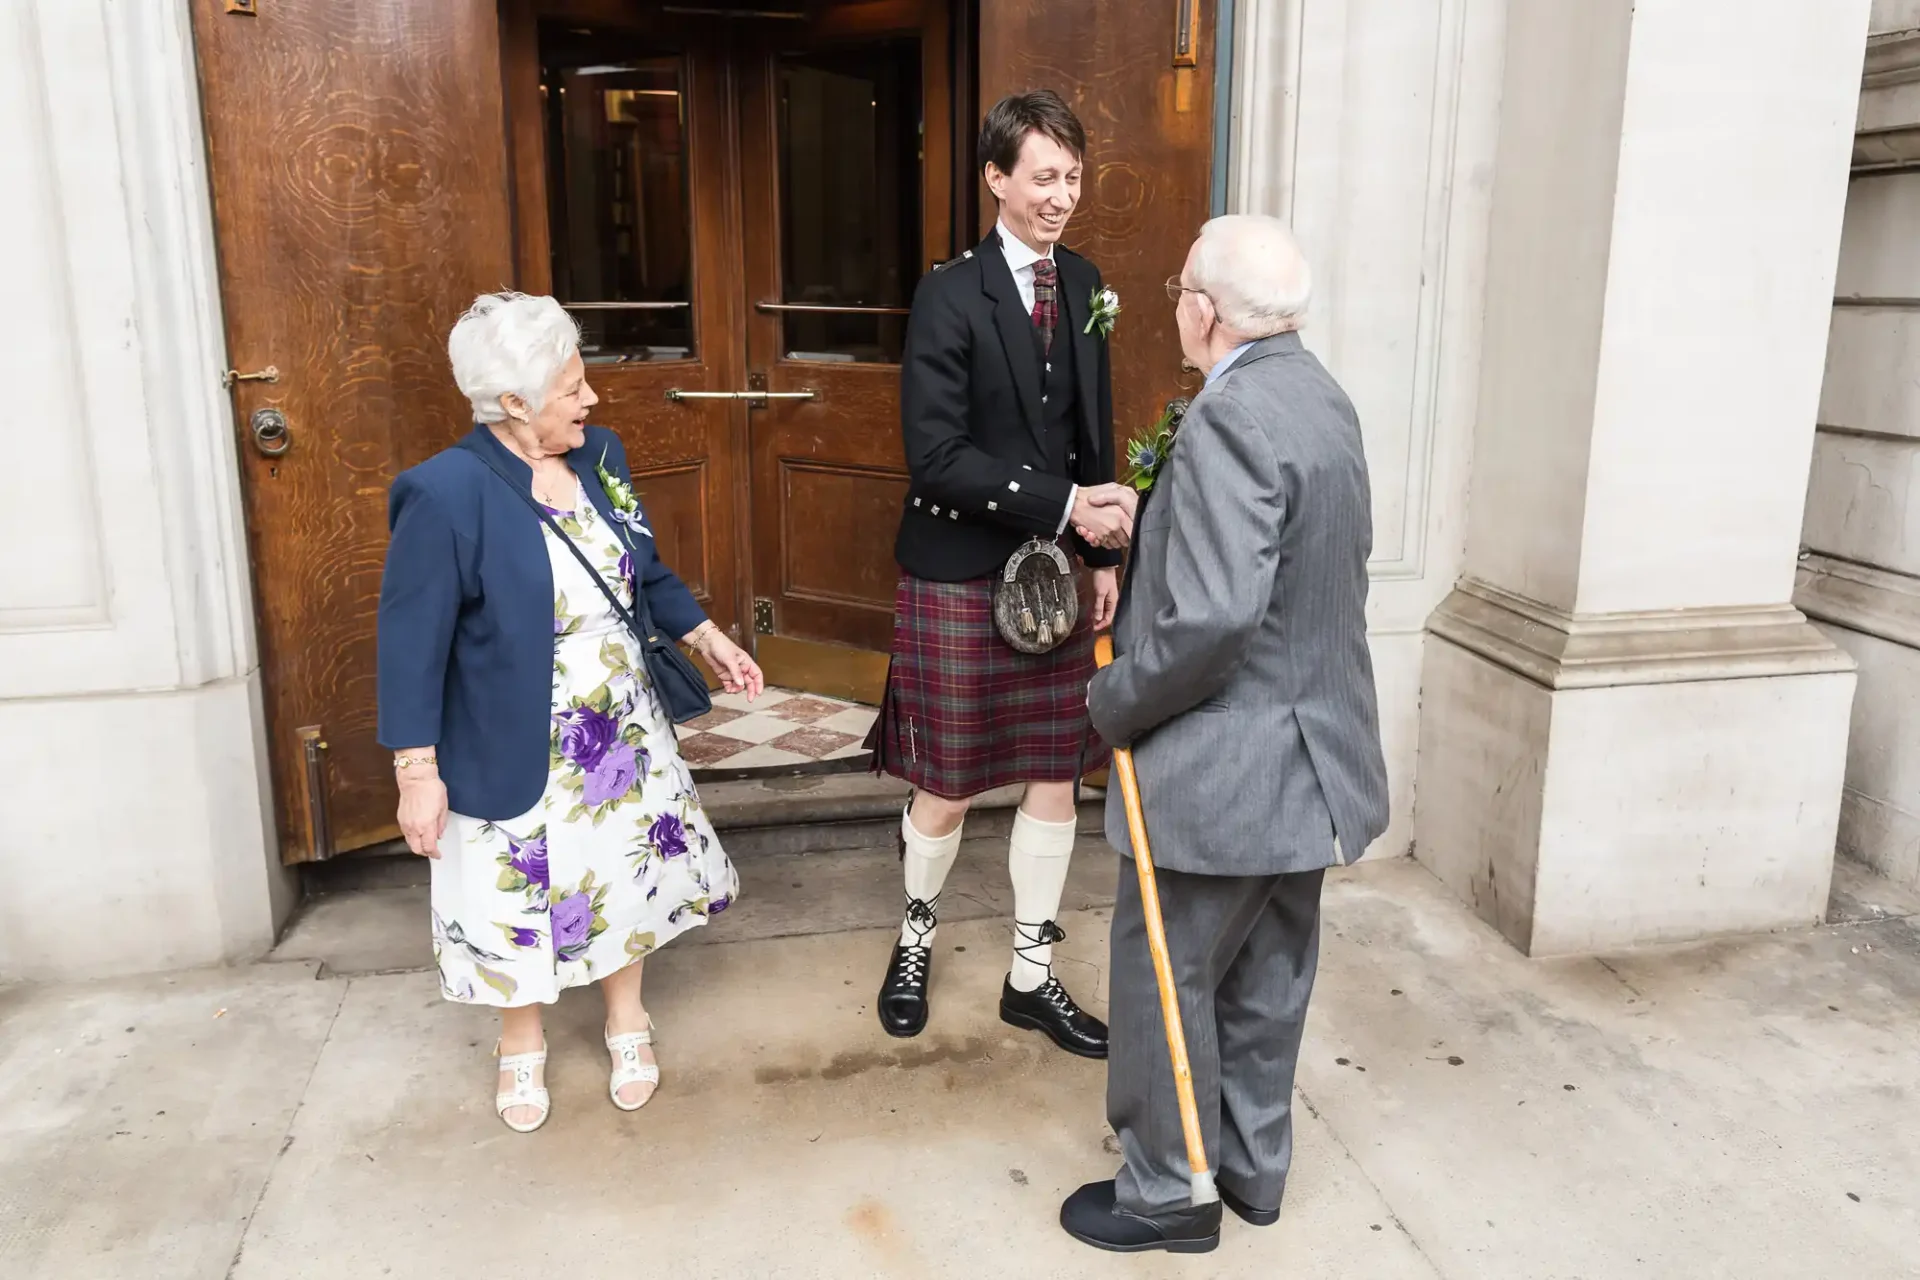 A groom in traditional scottish attire greets an elderly man with a cane outside a building, with an older woman beside them looking on.